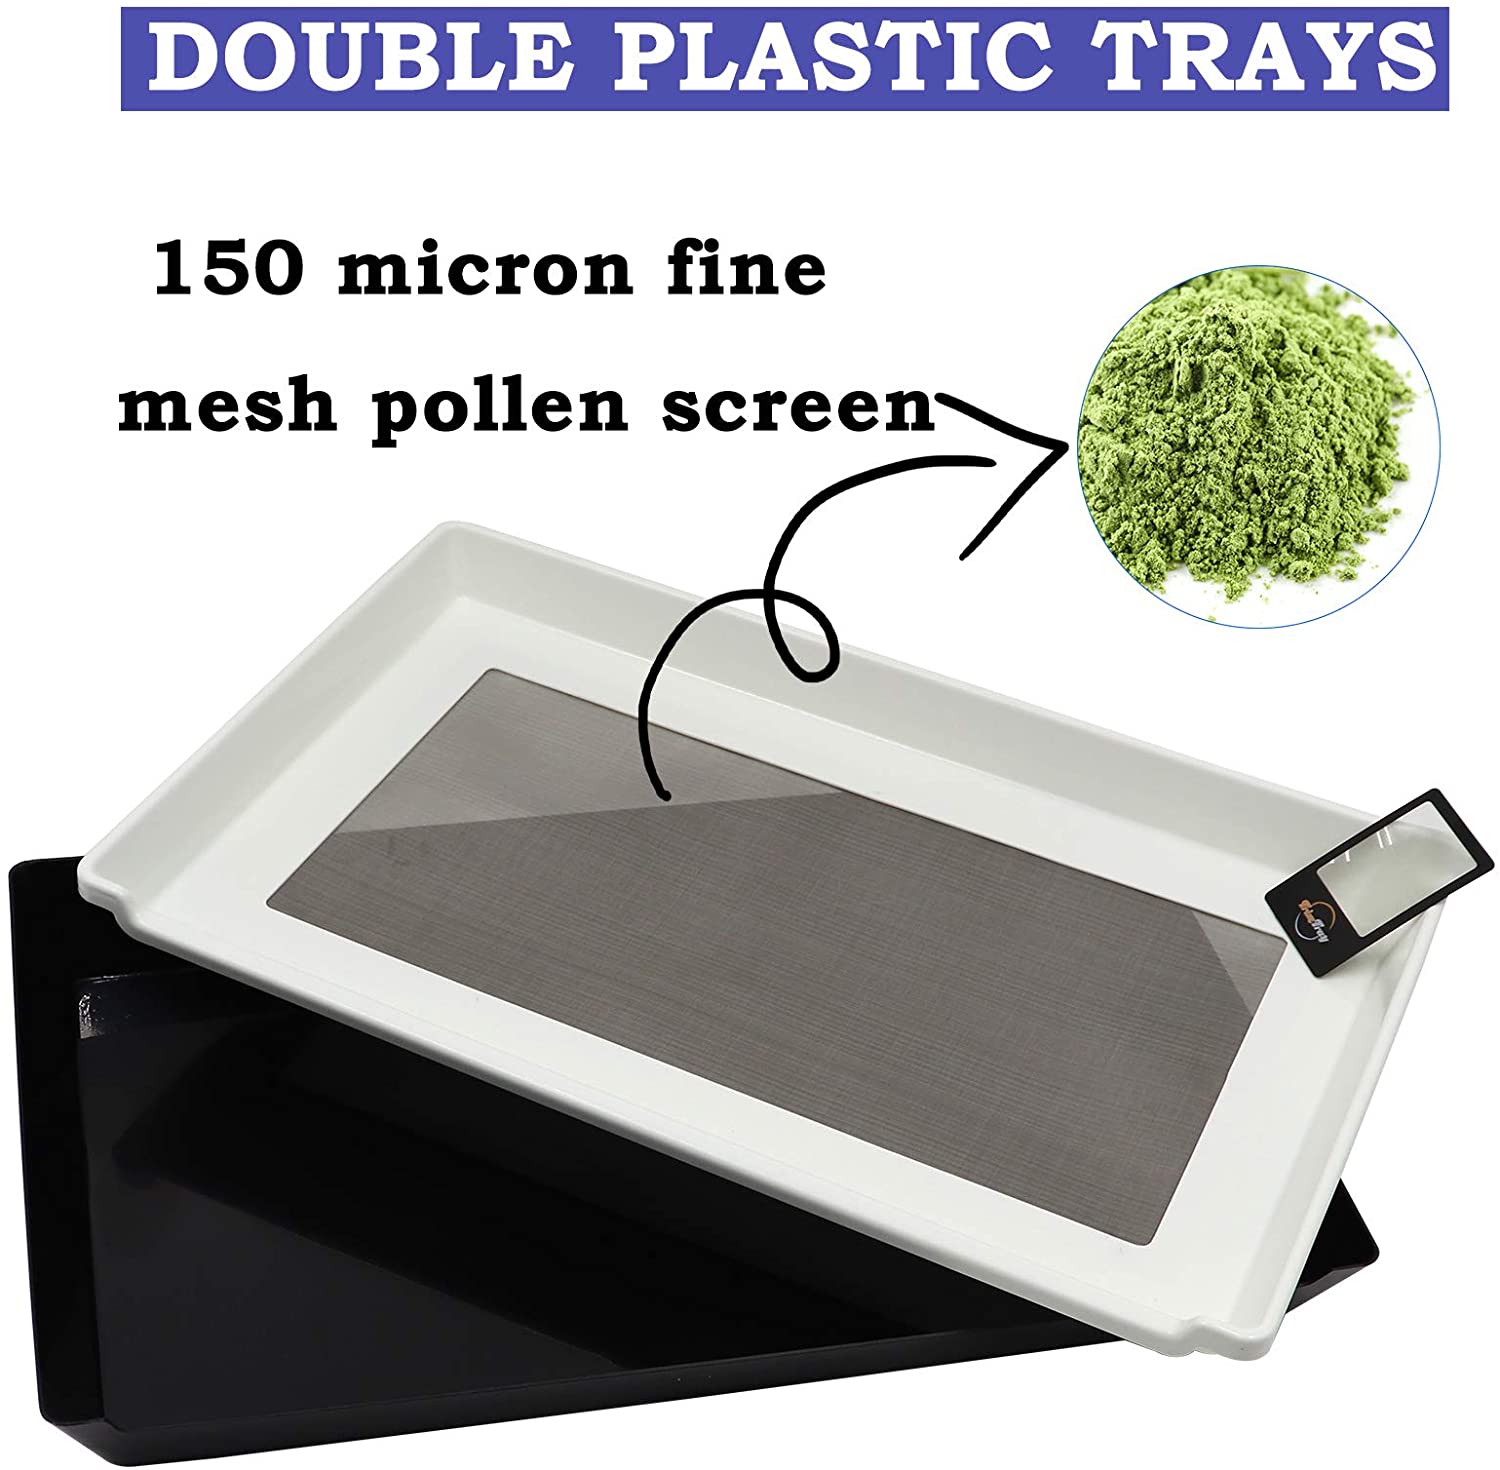 Herb Trimming Tray Outdoor Harvest 150 Micron-AULEY